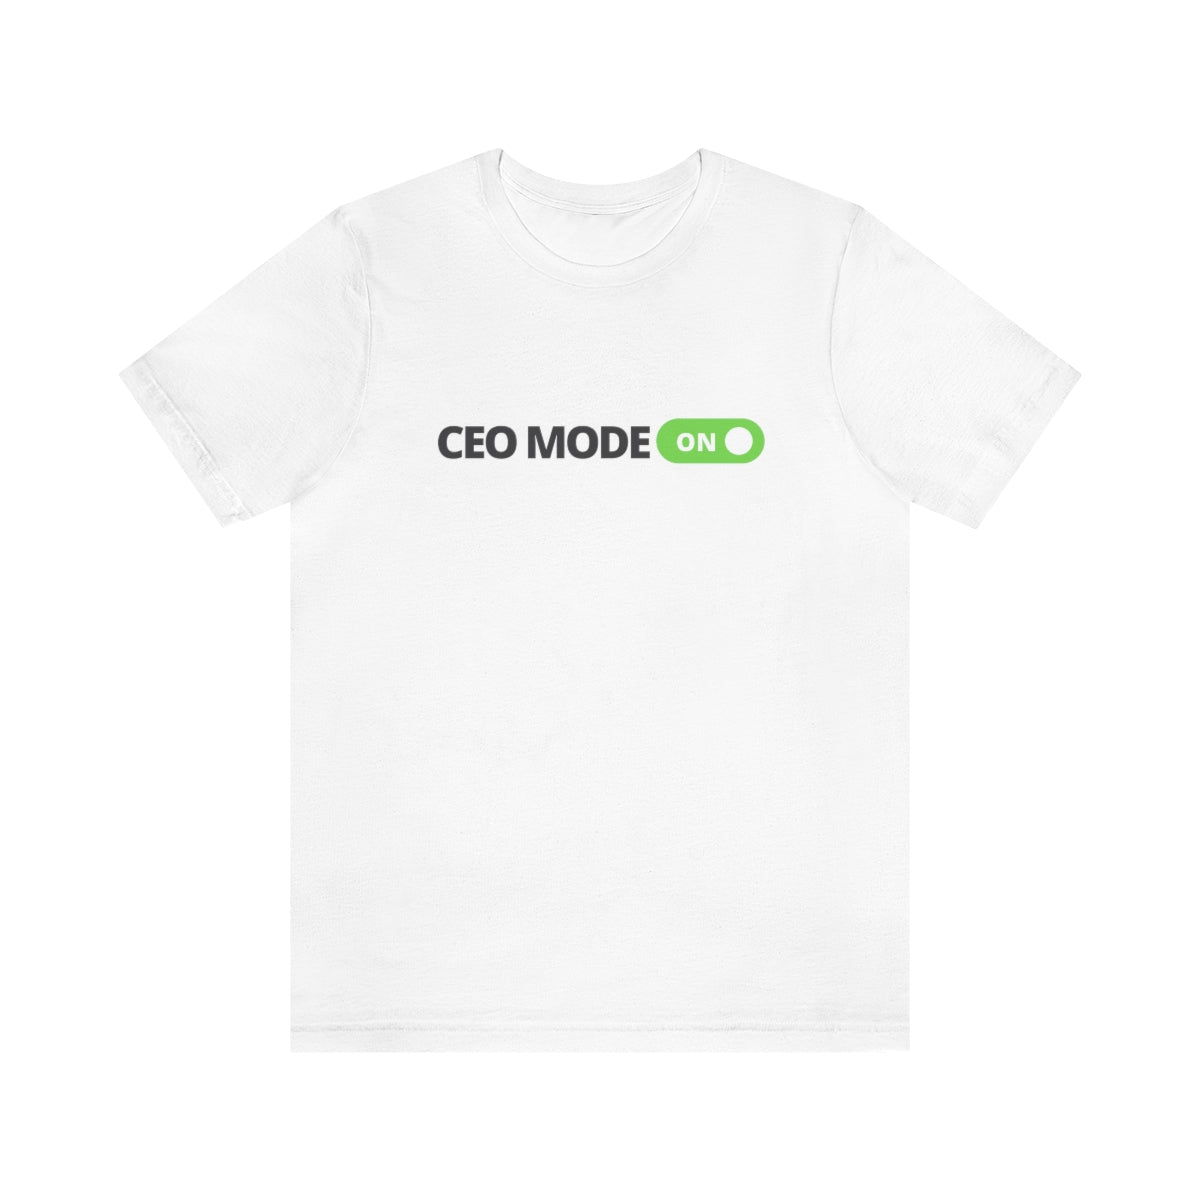 CEO Mode On T Shirt, Perfect Gift for CEOs | CEO Shirt | Entrepreneur | Business Owner | Motivation | Unisex Jersey Short Sleeve